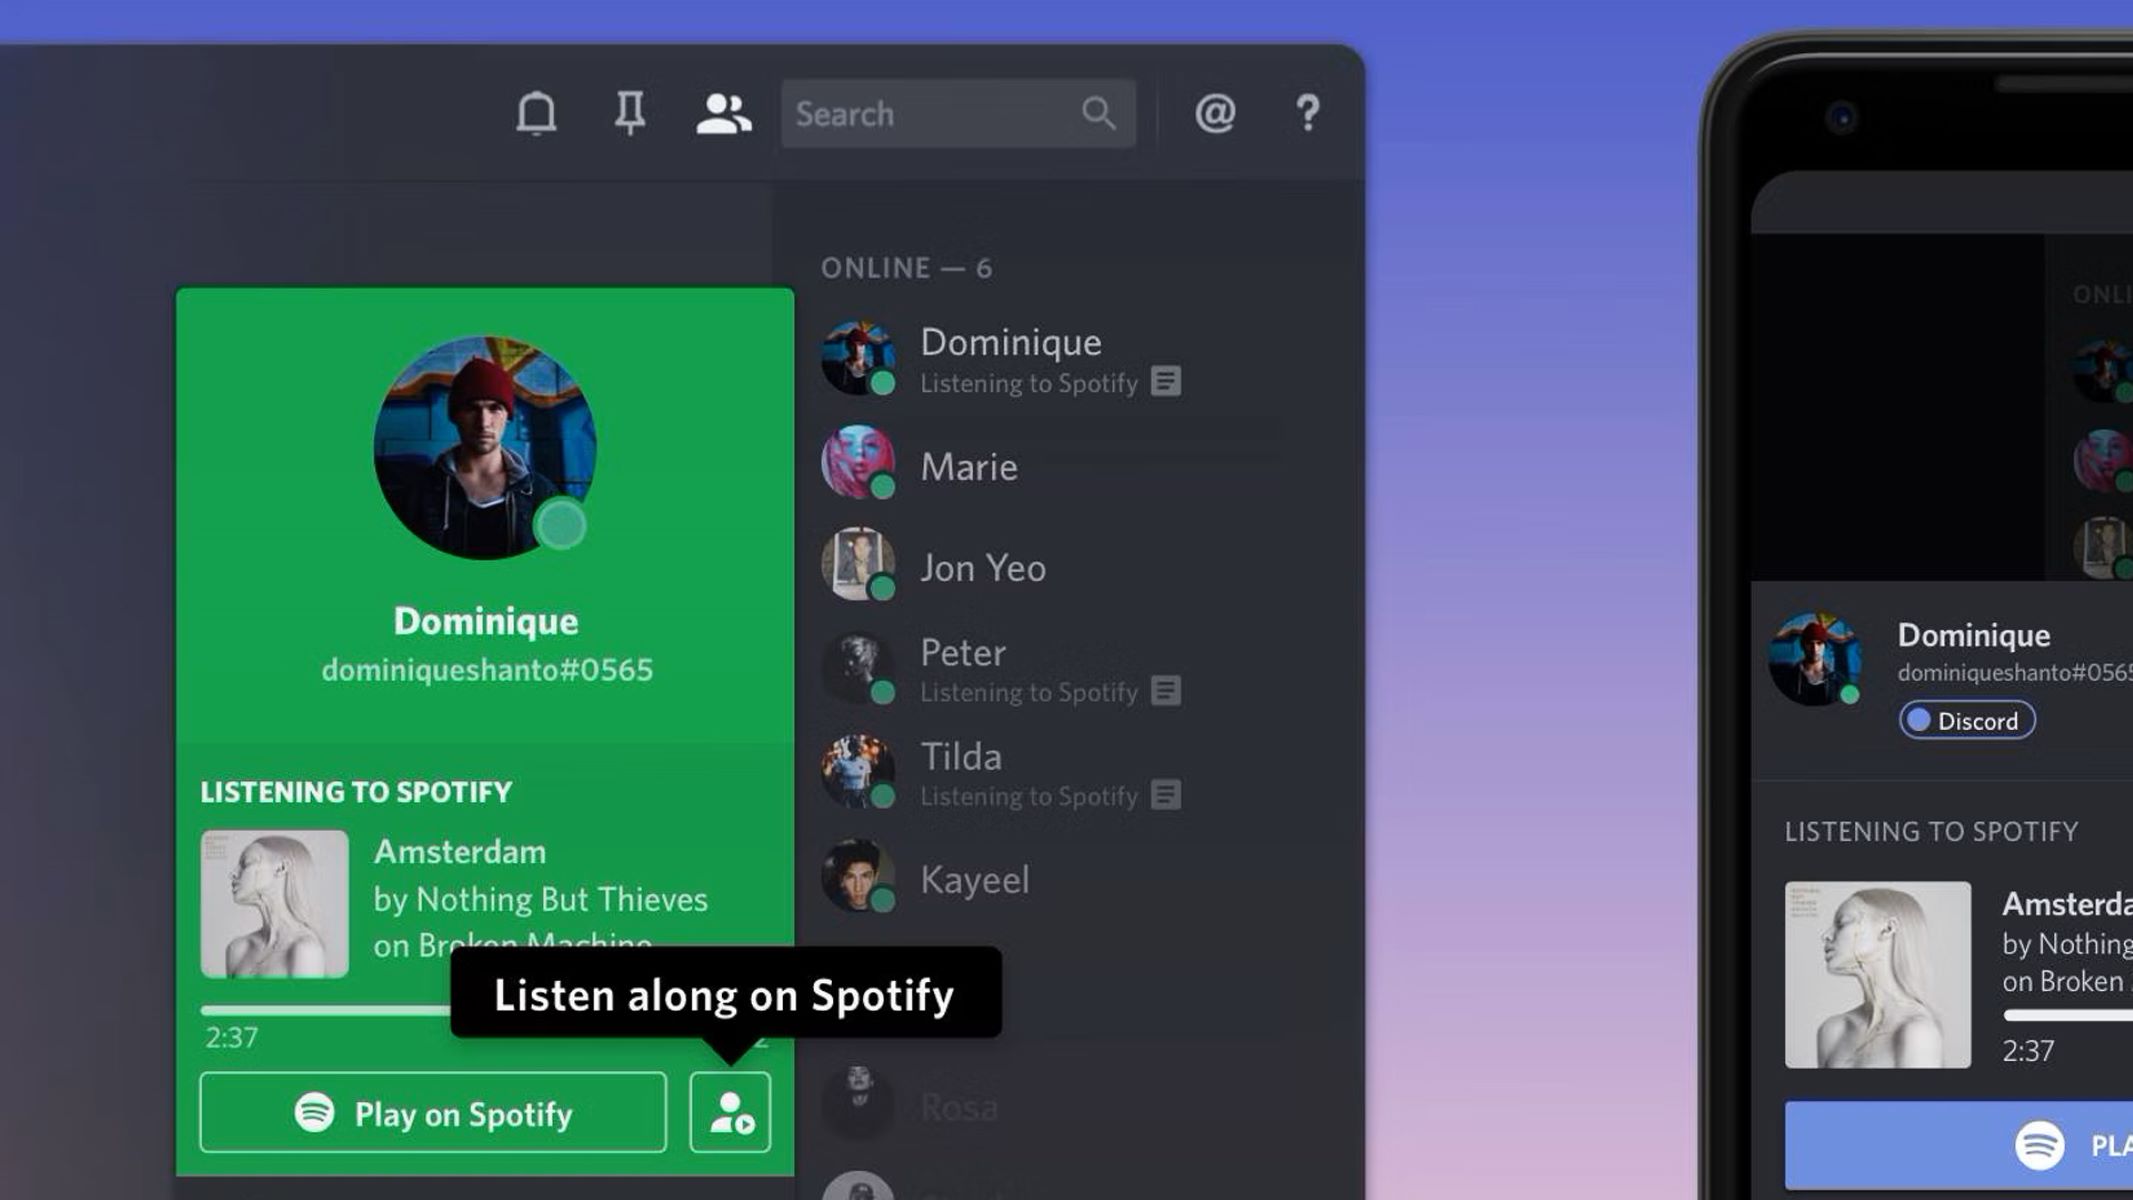 How To Start A Spotify Listening Party On Discord